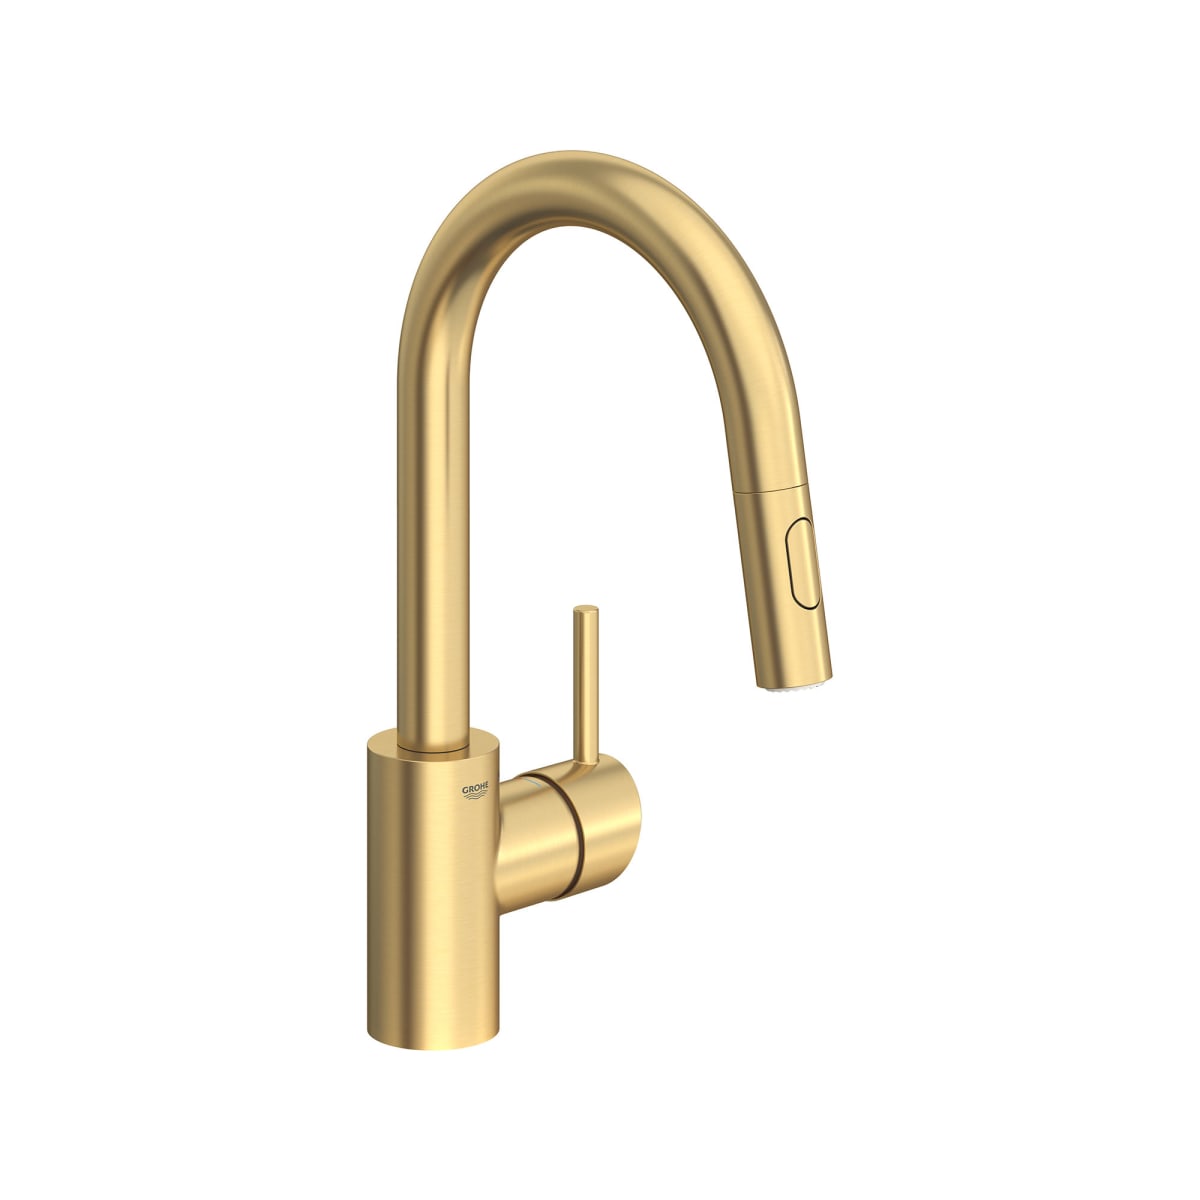 Grohe 31479gn1 Concetto 1 75 Gpm Single